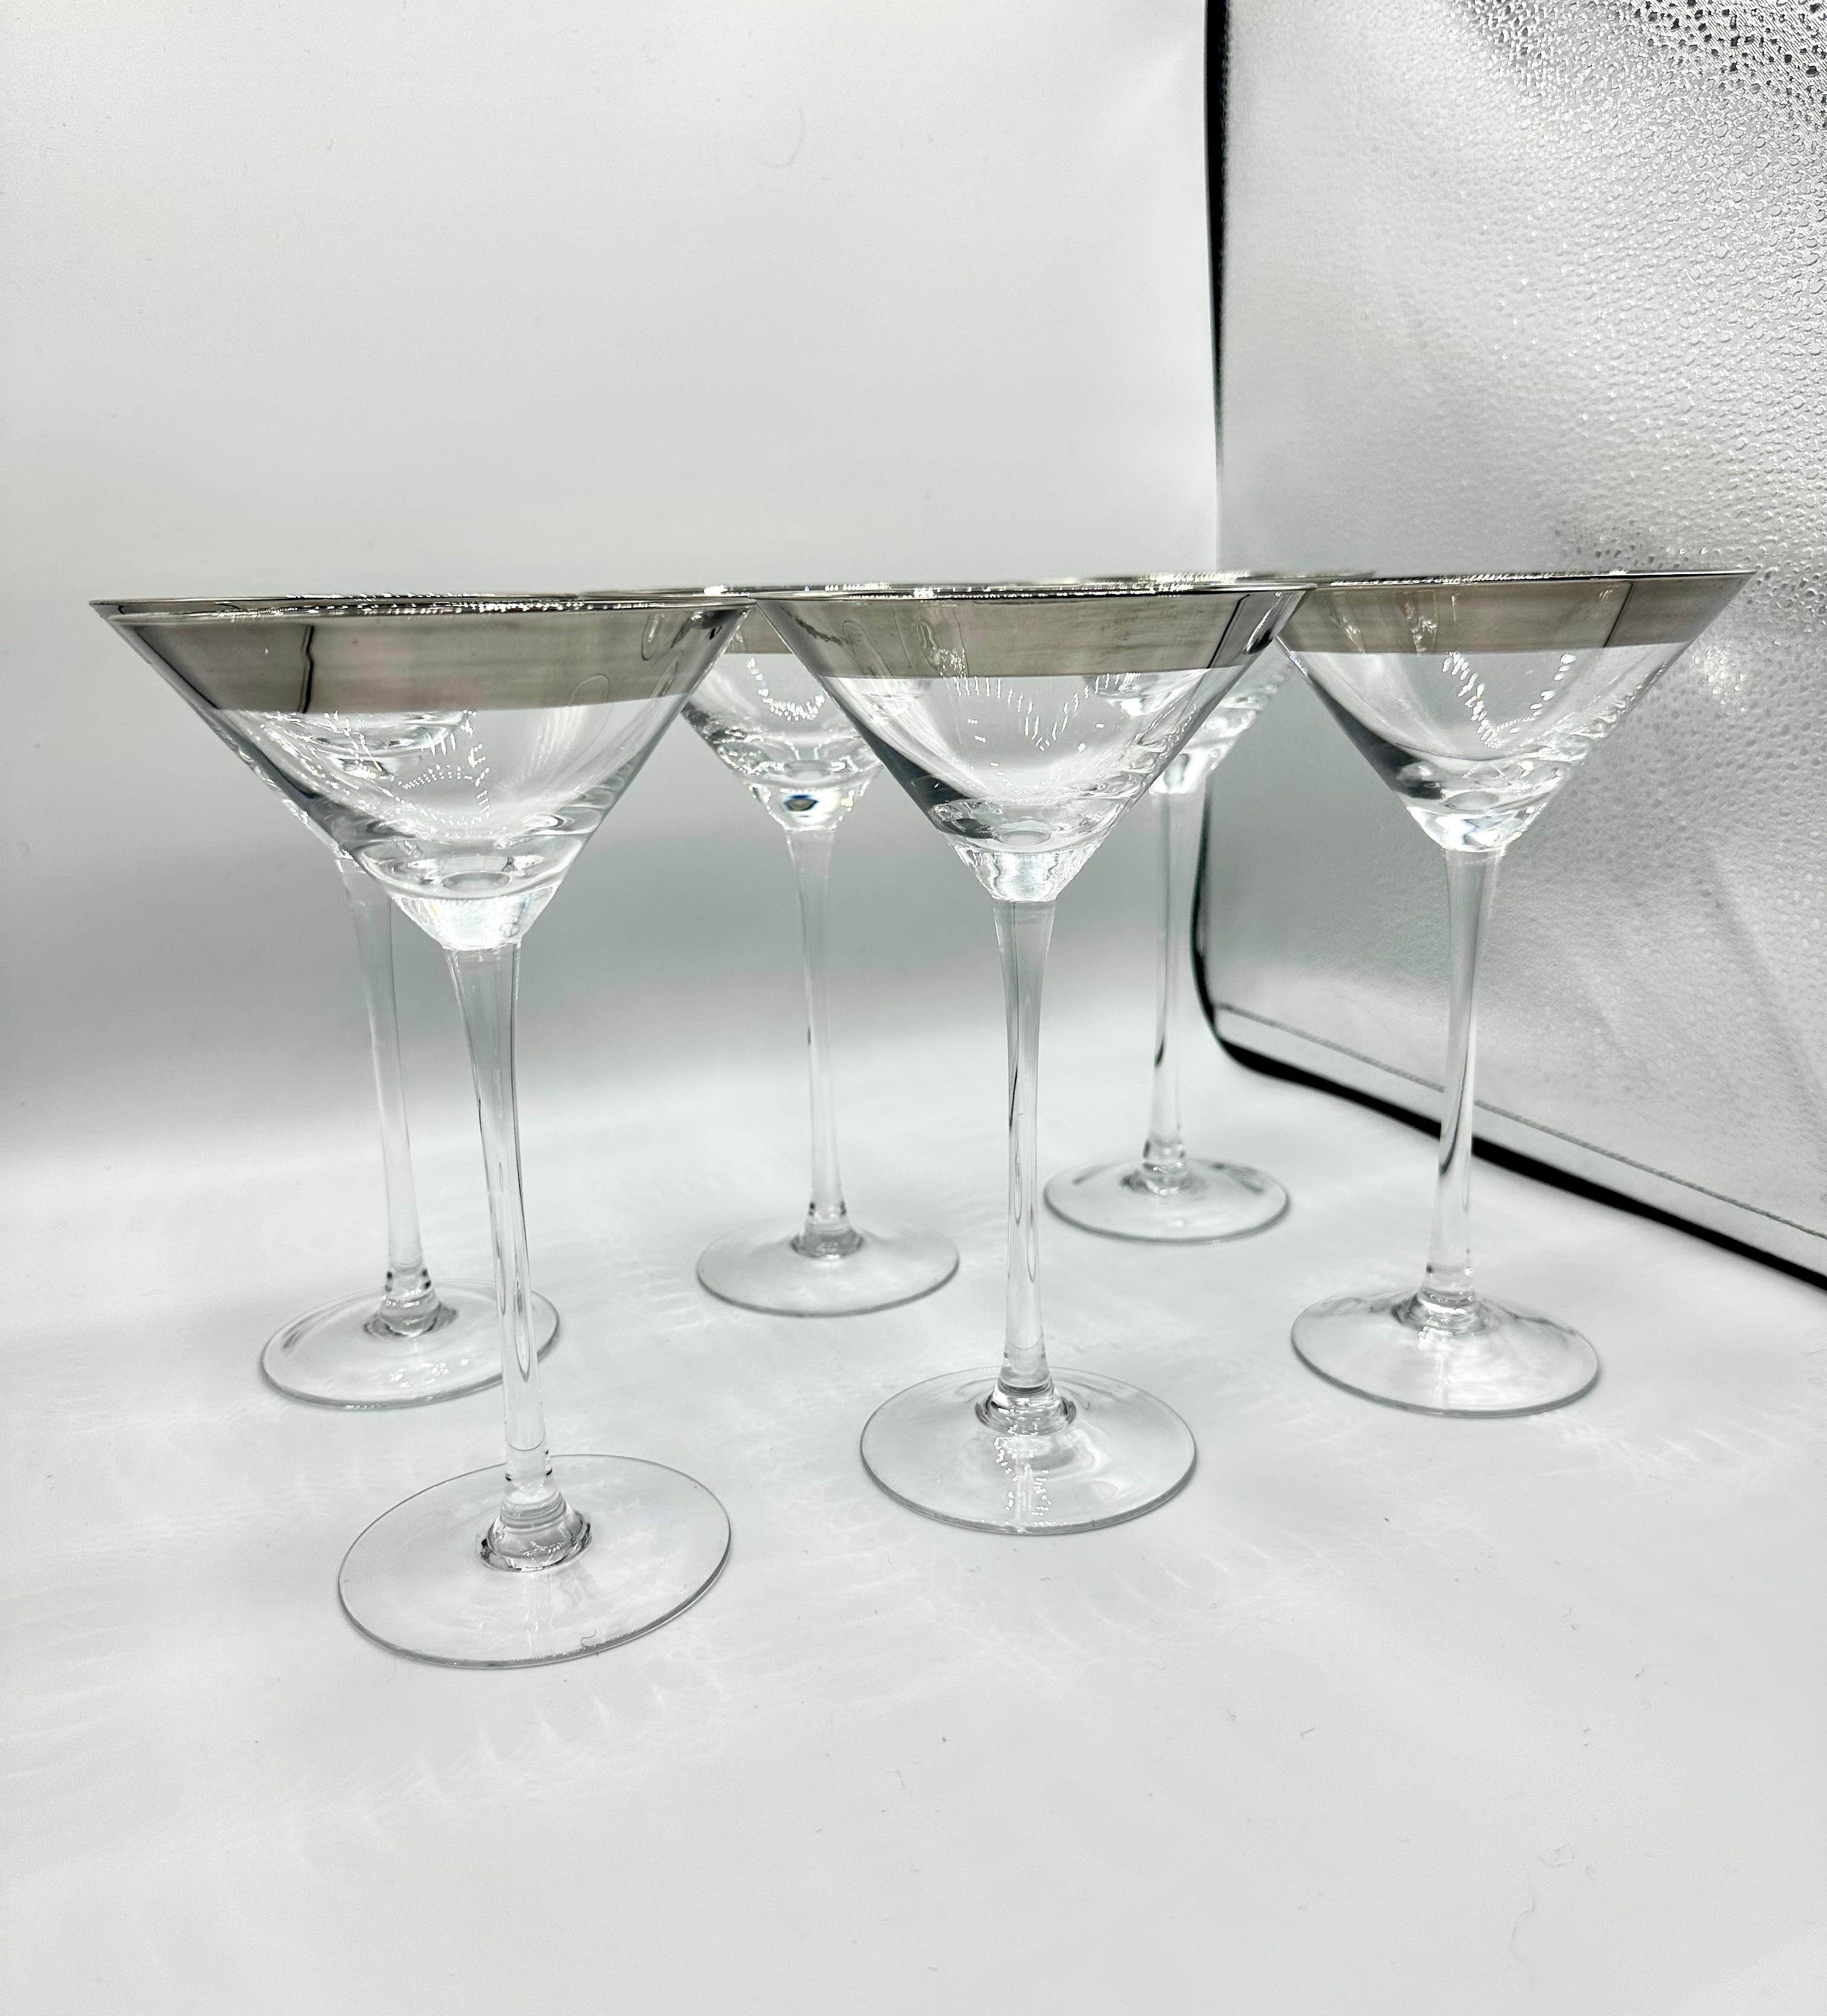 Stunning Set of 6 Dorothy Thorpe Platinum Rimmed Martini Glasses! Perfect for entertaining, these mid-century modernism style glasses are crafted from high-quality glass and feature a beautiful platinum thick band rim. These vintage glasses were